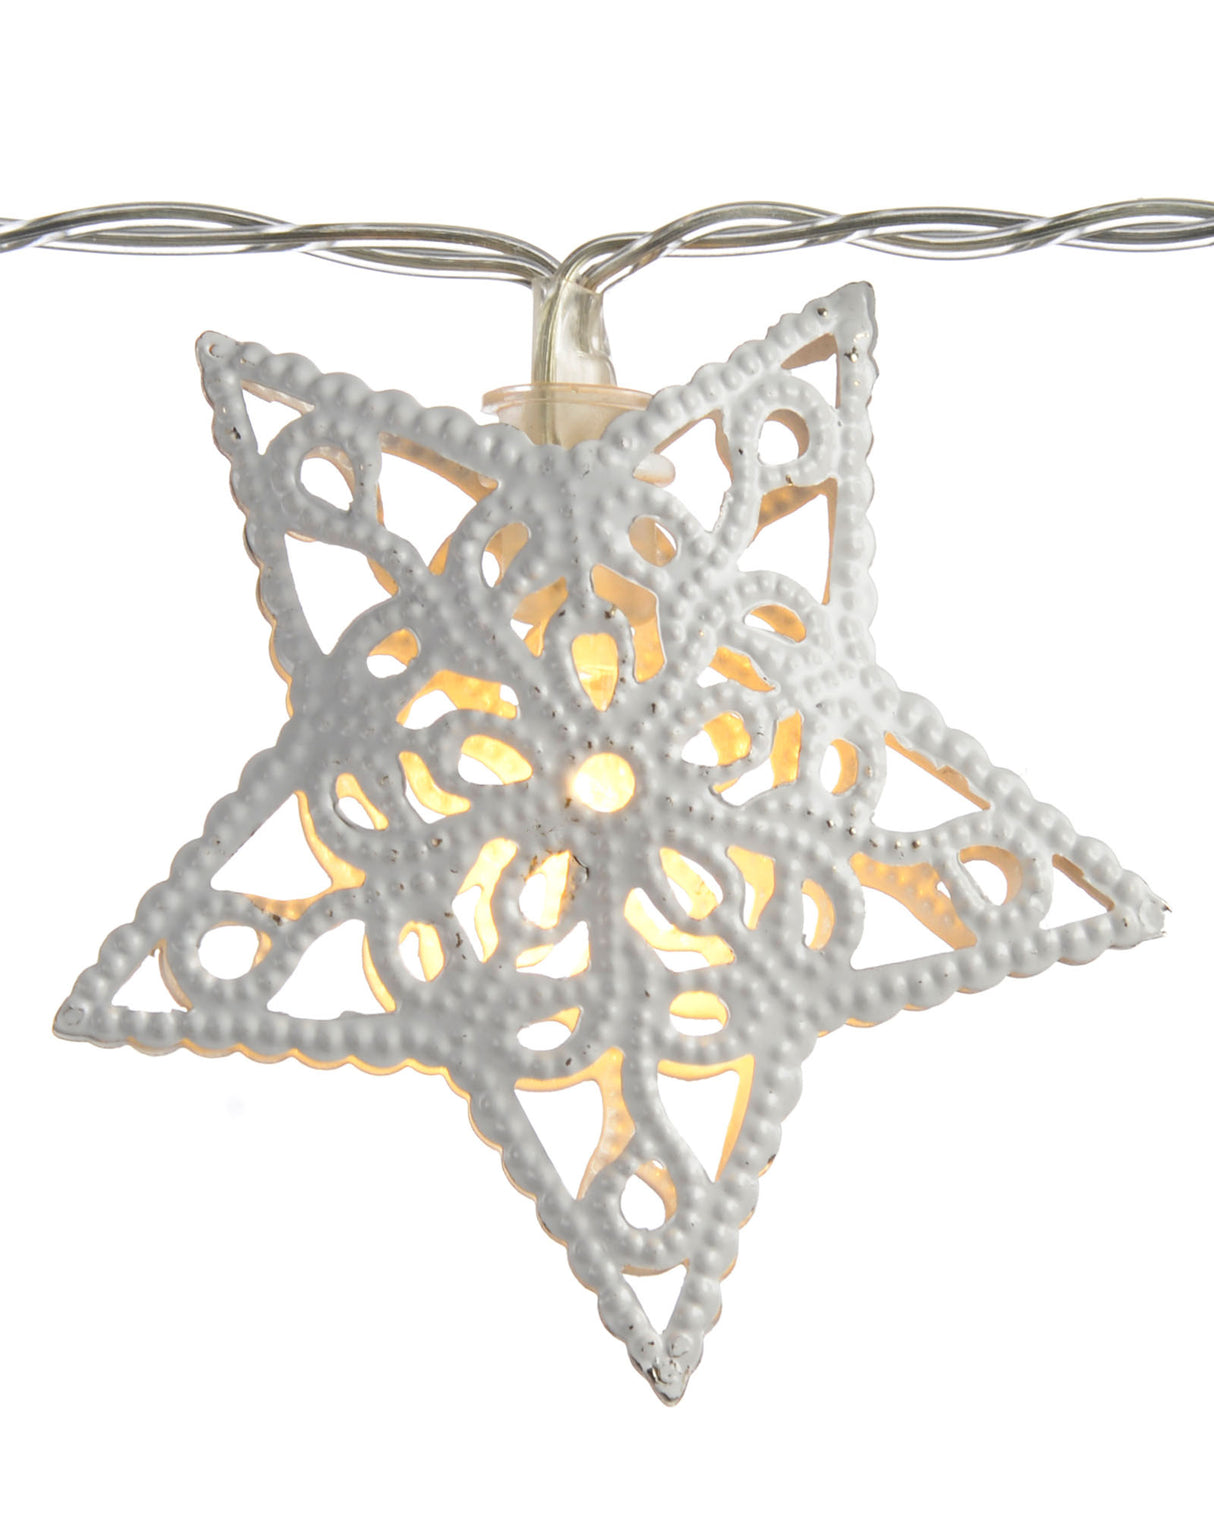 Battery Operated Star Light String Christmas Decoration with 10 White LED Lights - White